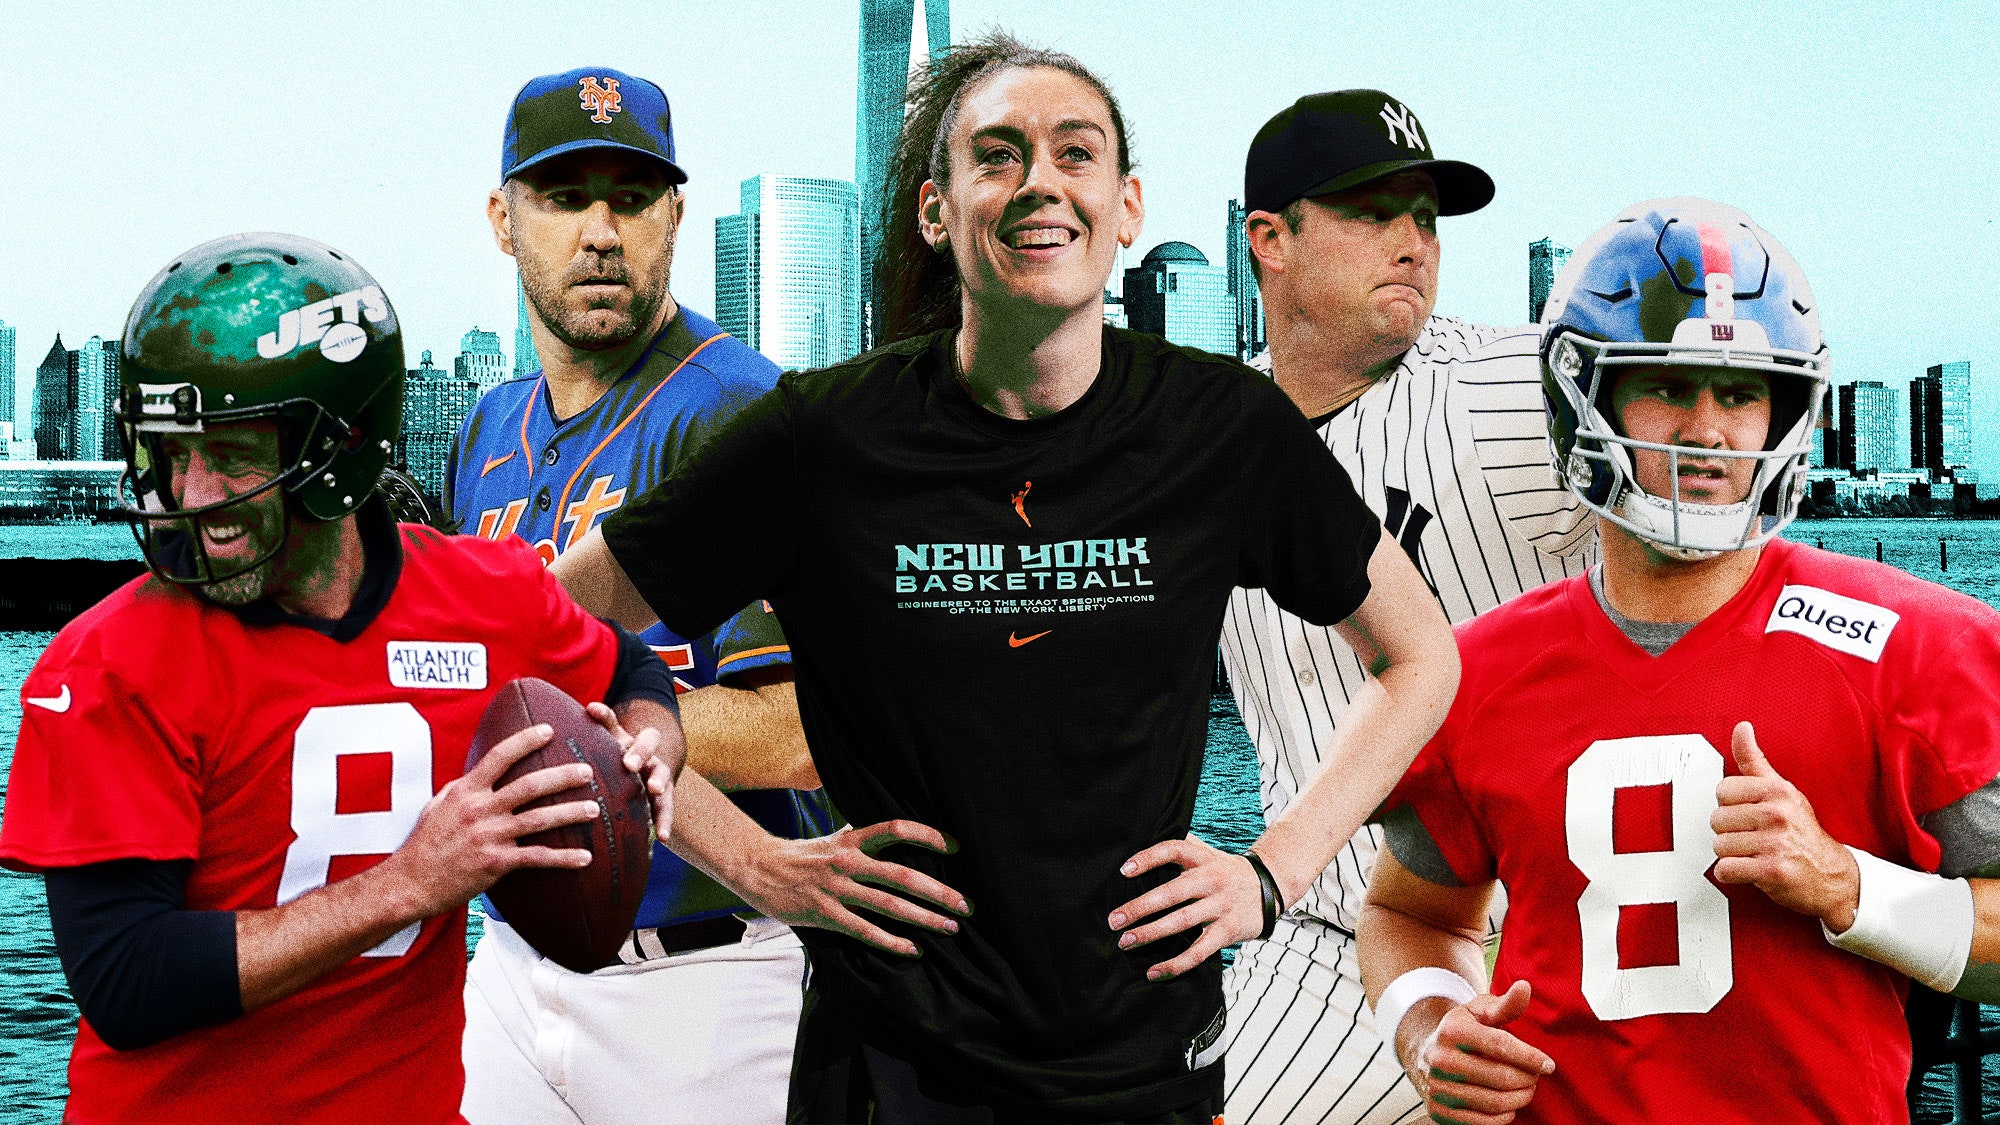 who-is-the-king-of-new-york-sports?